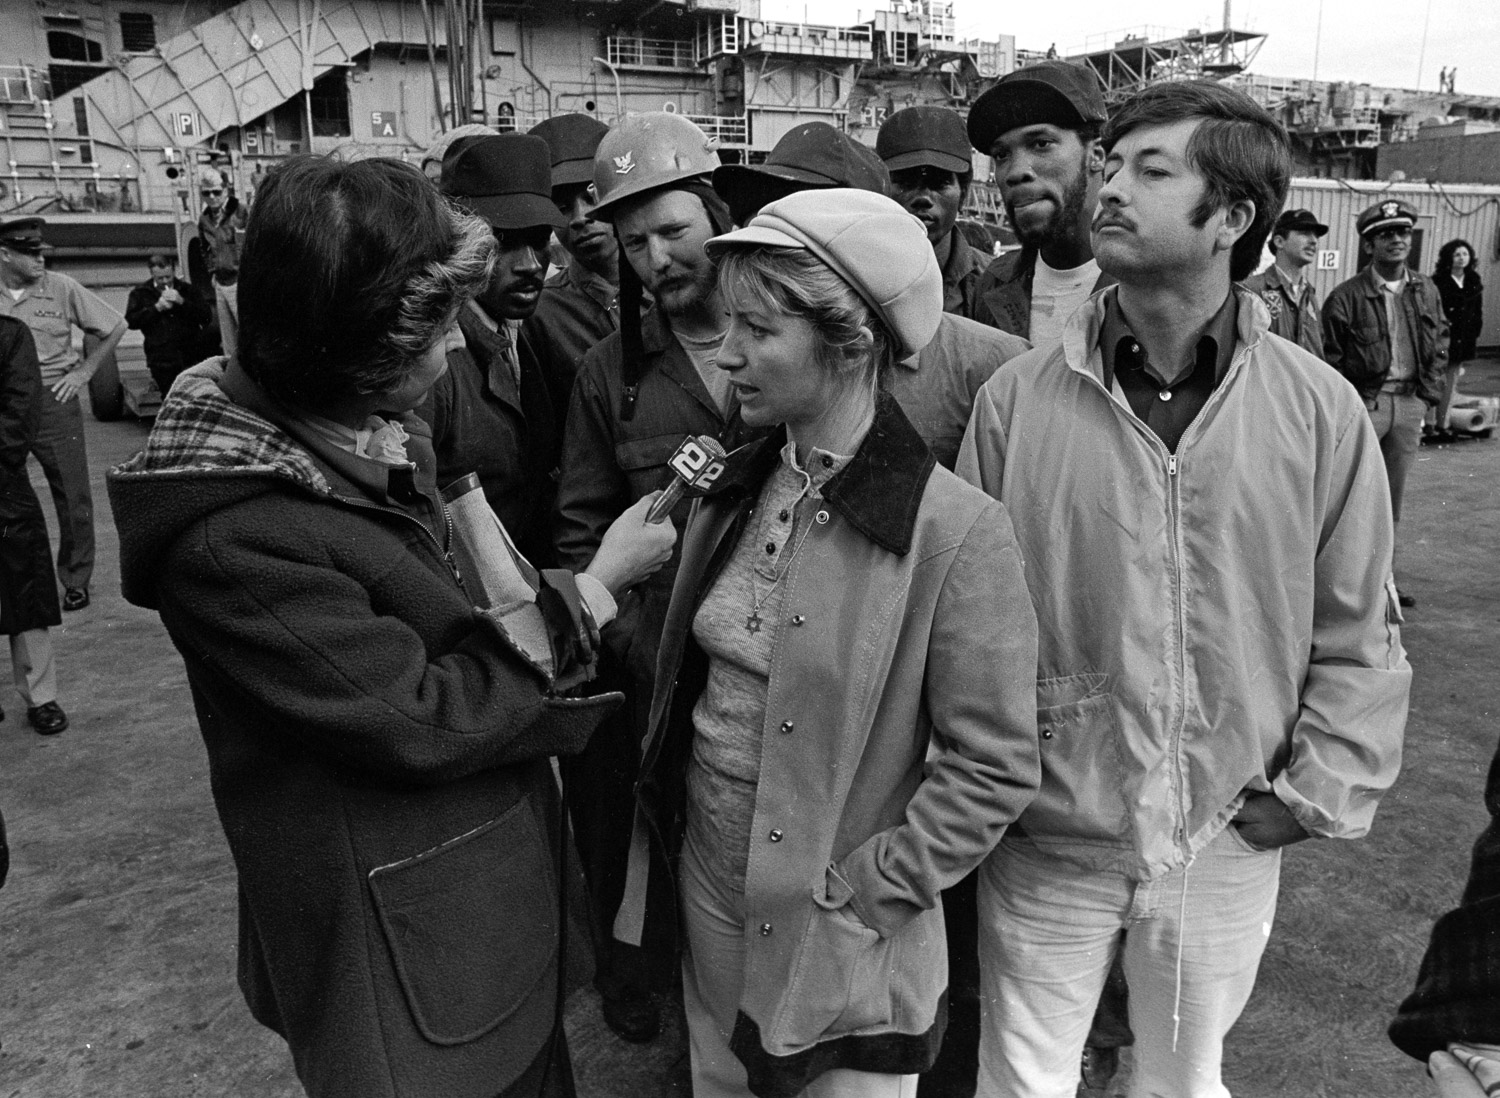  Vicki Kelly, co-leader of the Navy wives' group Save American Vessels, explains to a reporter why they want the USS Coral Sea repaired fully before it deploys in December 1974. 